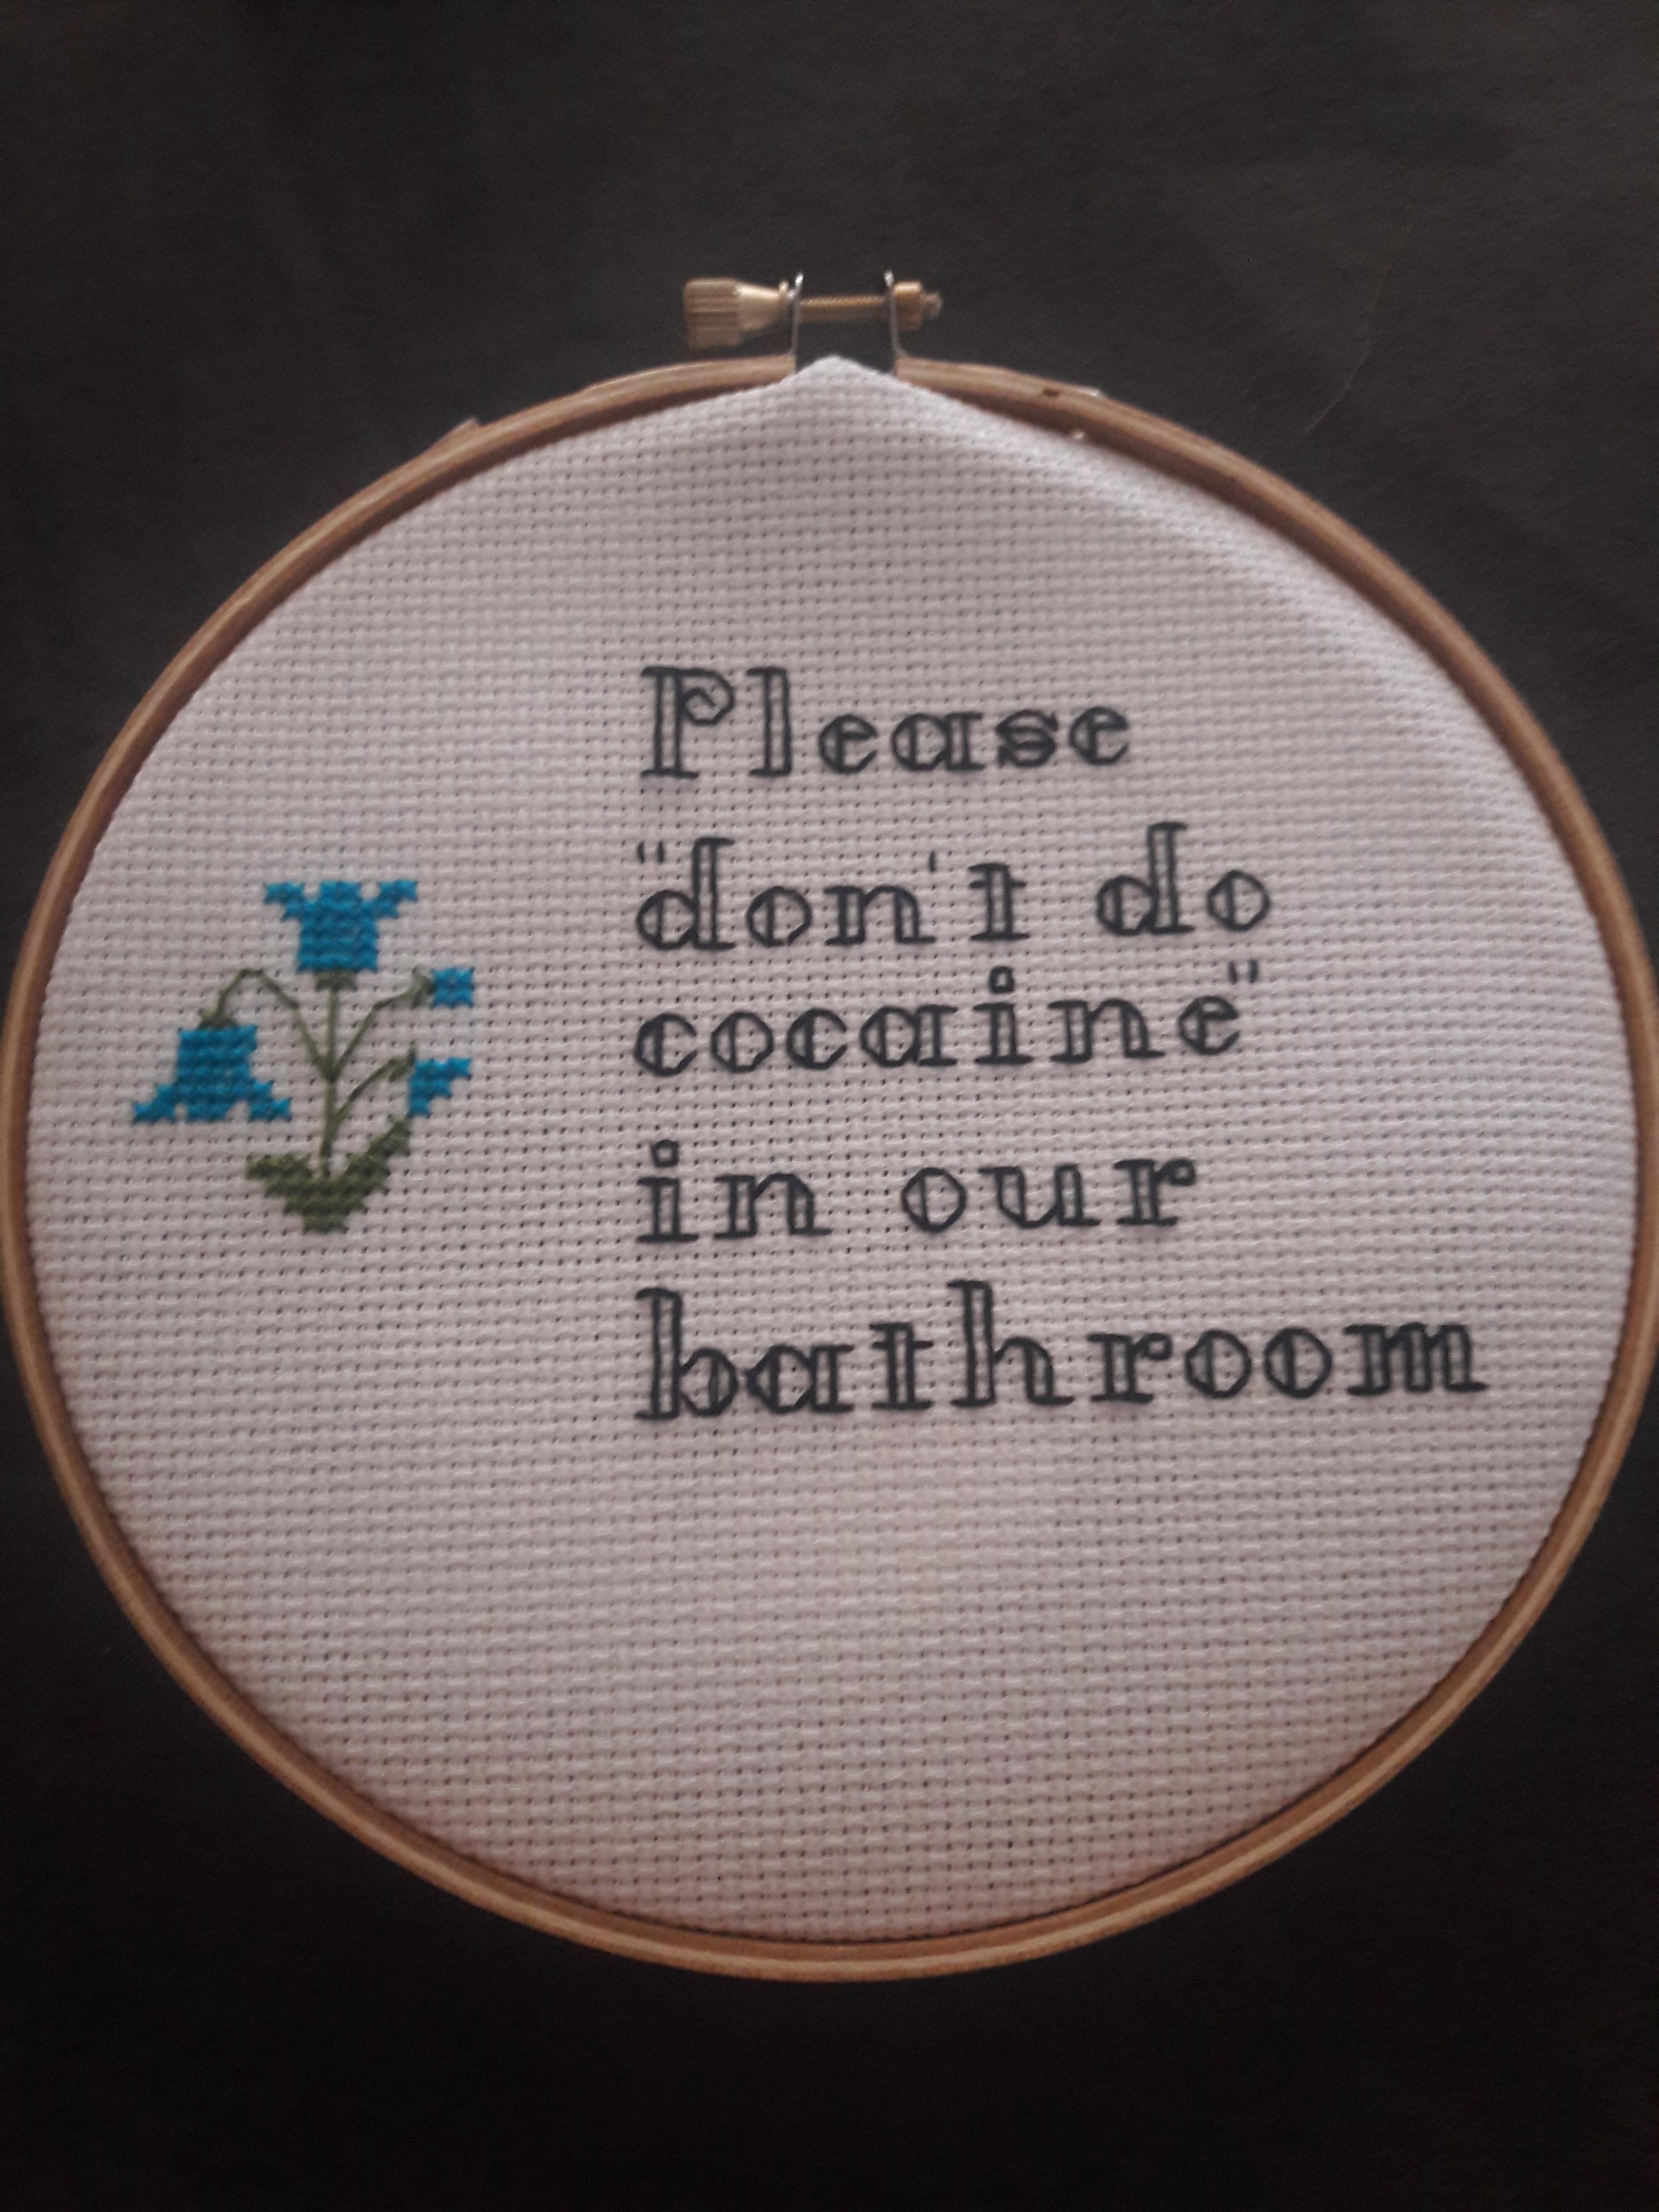 needlework - Please don't do cocaine in our bonhroom